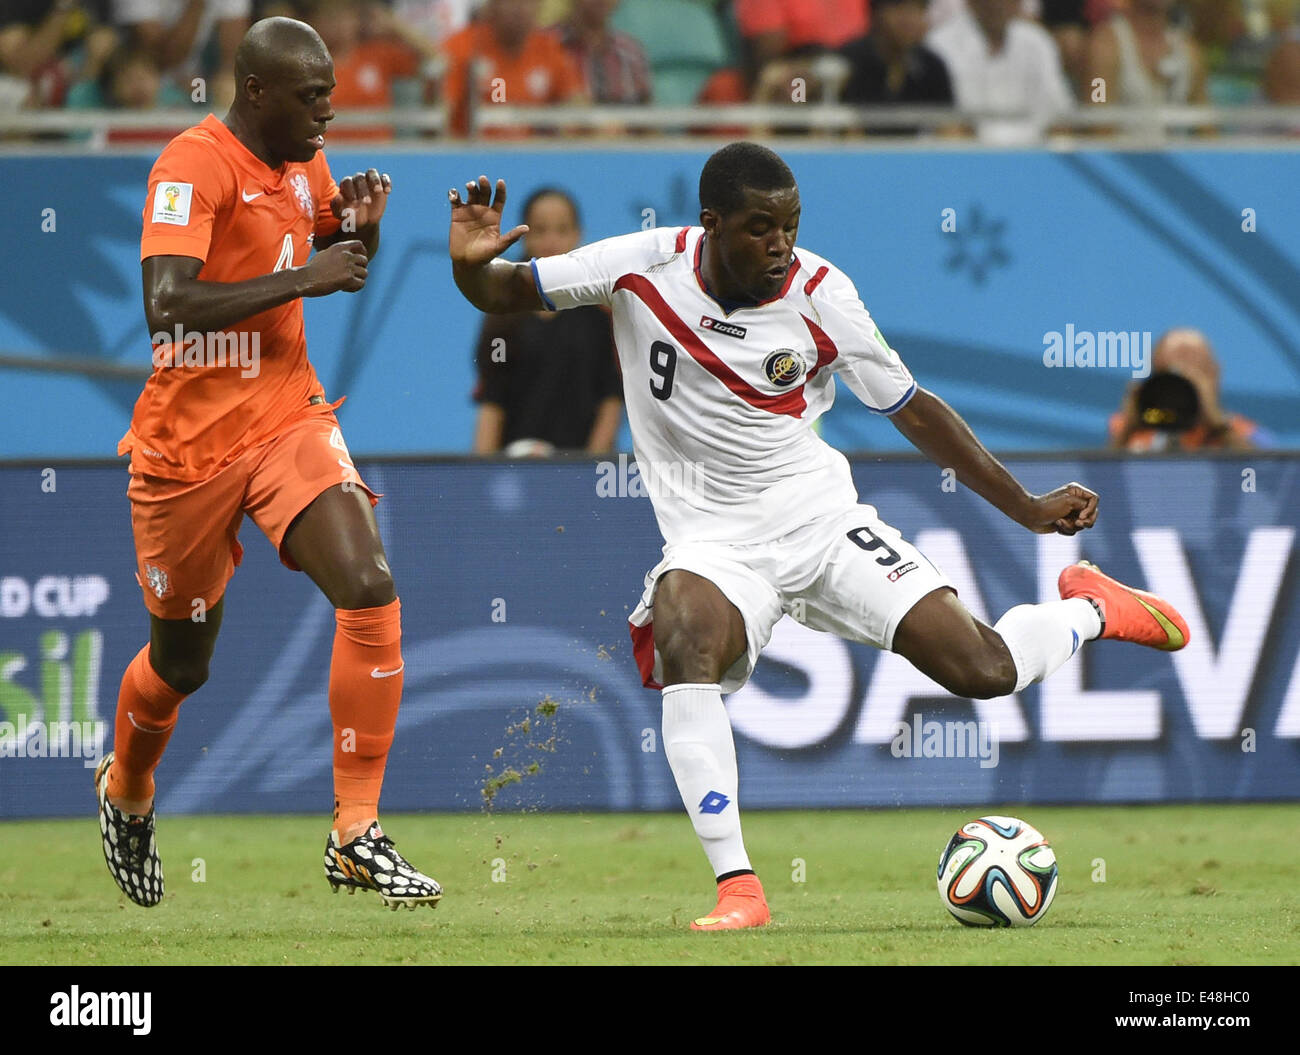 Salvador, Brazil. 5th July, 2014. Netherlands's Bruno Martins Indi vies with Costa Rica's Joel Campbell during a quarter-finals match between Netherlands and Costa Rica of 2014 FIFA World Cup at the Arena Fonte Nova Stadium in Salvador, Brazil, on July 5, 2014. Credit:  Lui Siu Wai/Xinhua/Alamy Live News Stock Photo